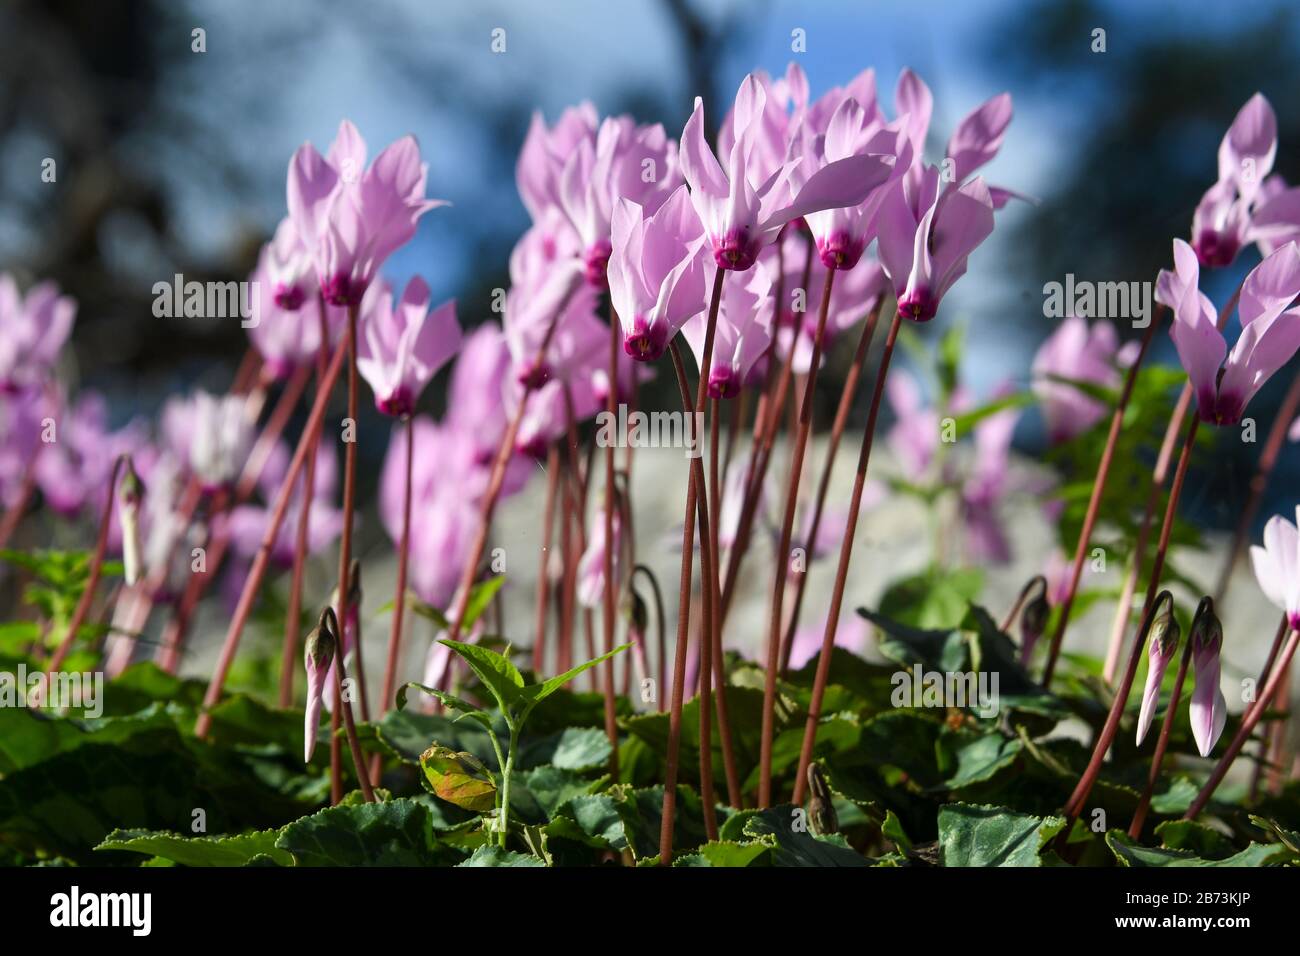 a cluster of Flowering Persian Violets (Cyclamen persicum). Photographed in Israel in March. Stock Photo